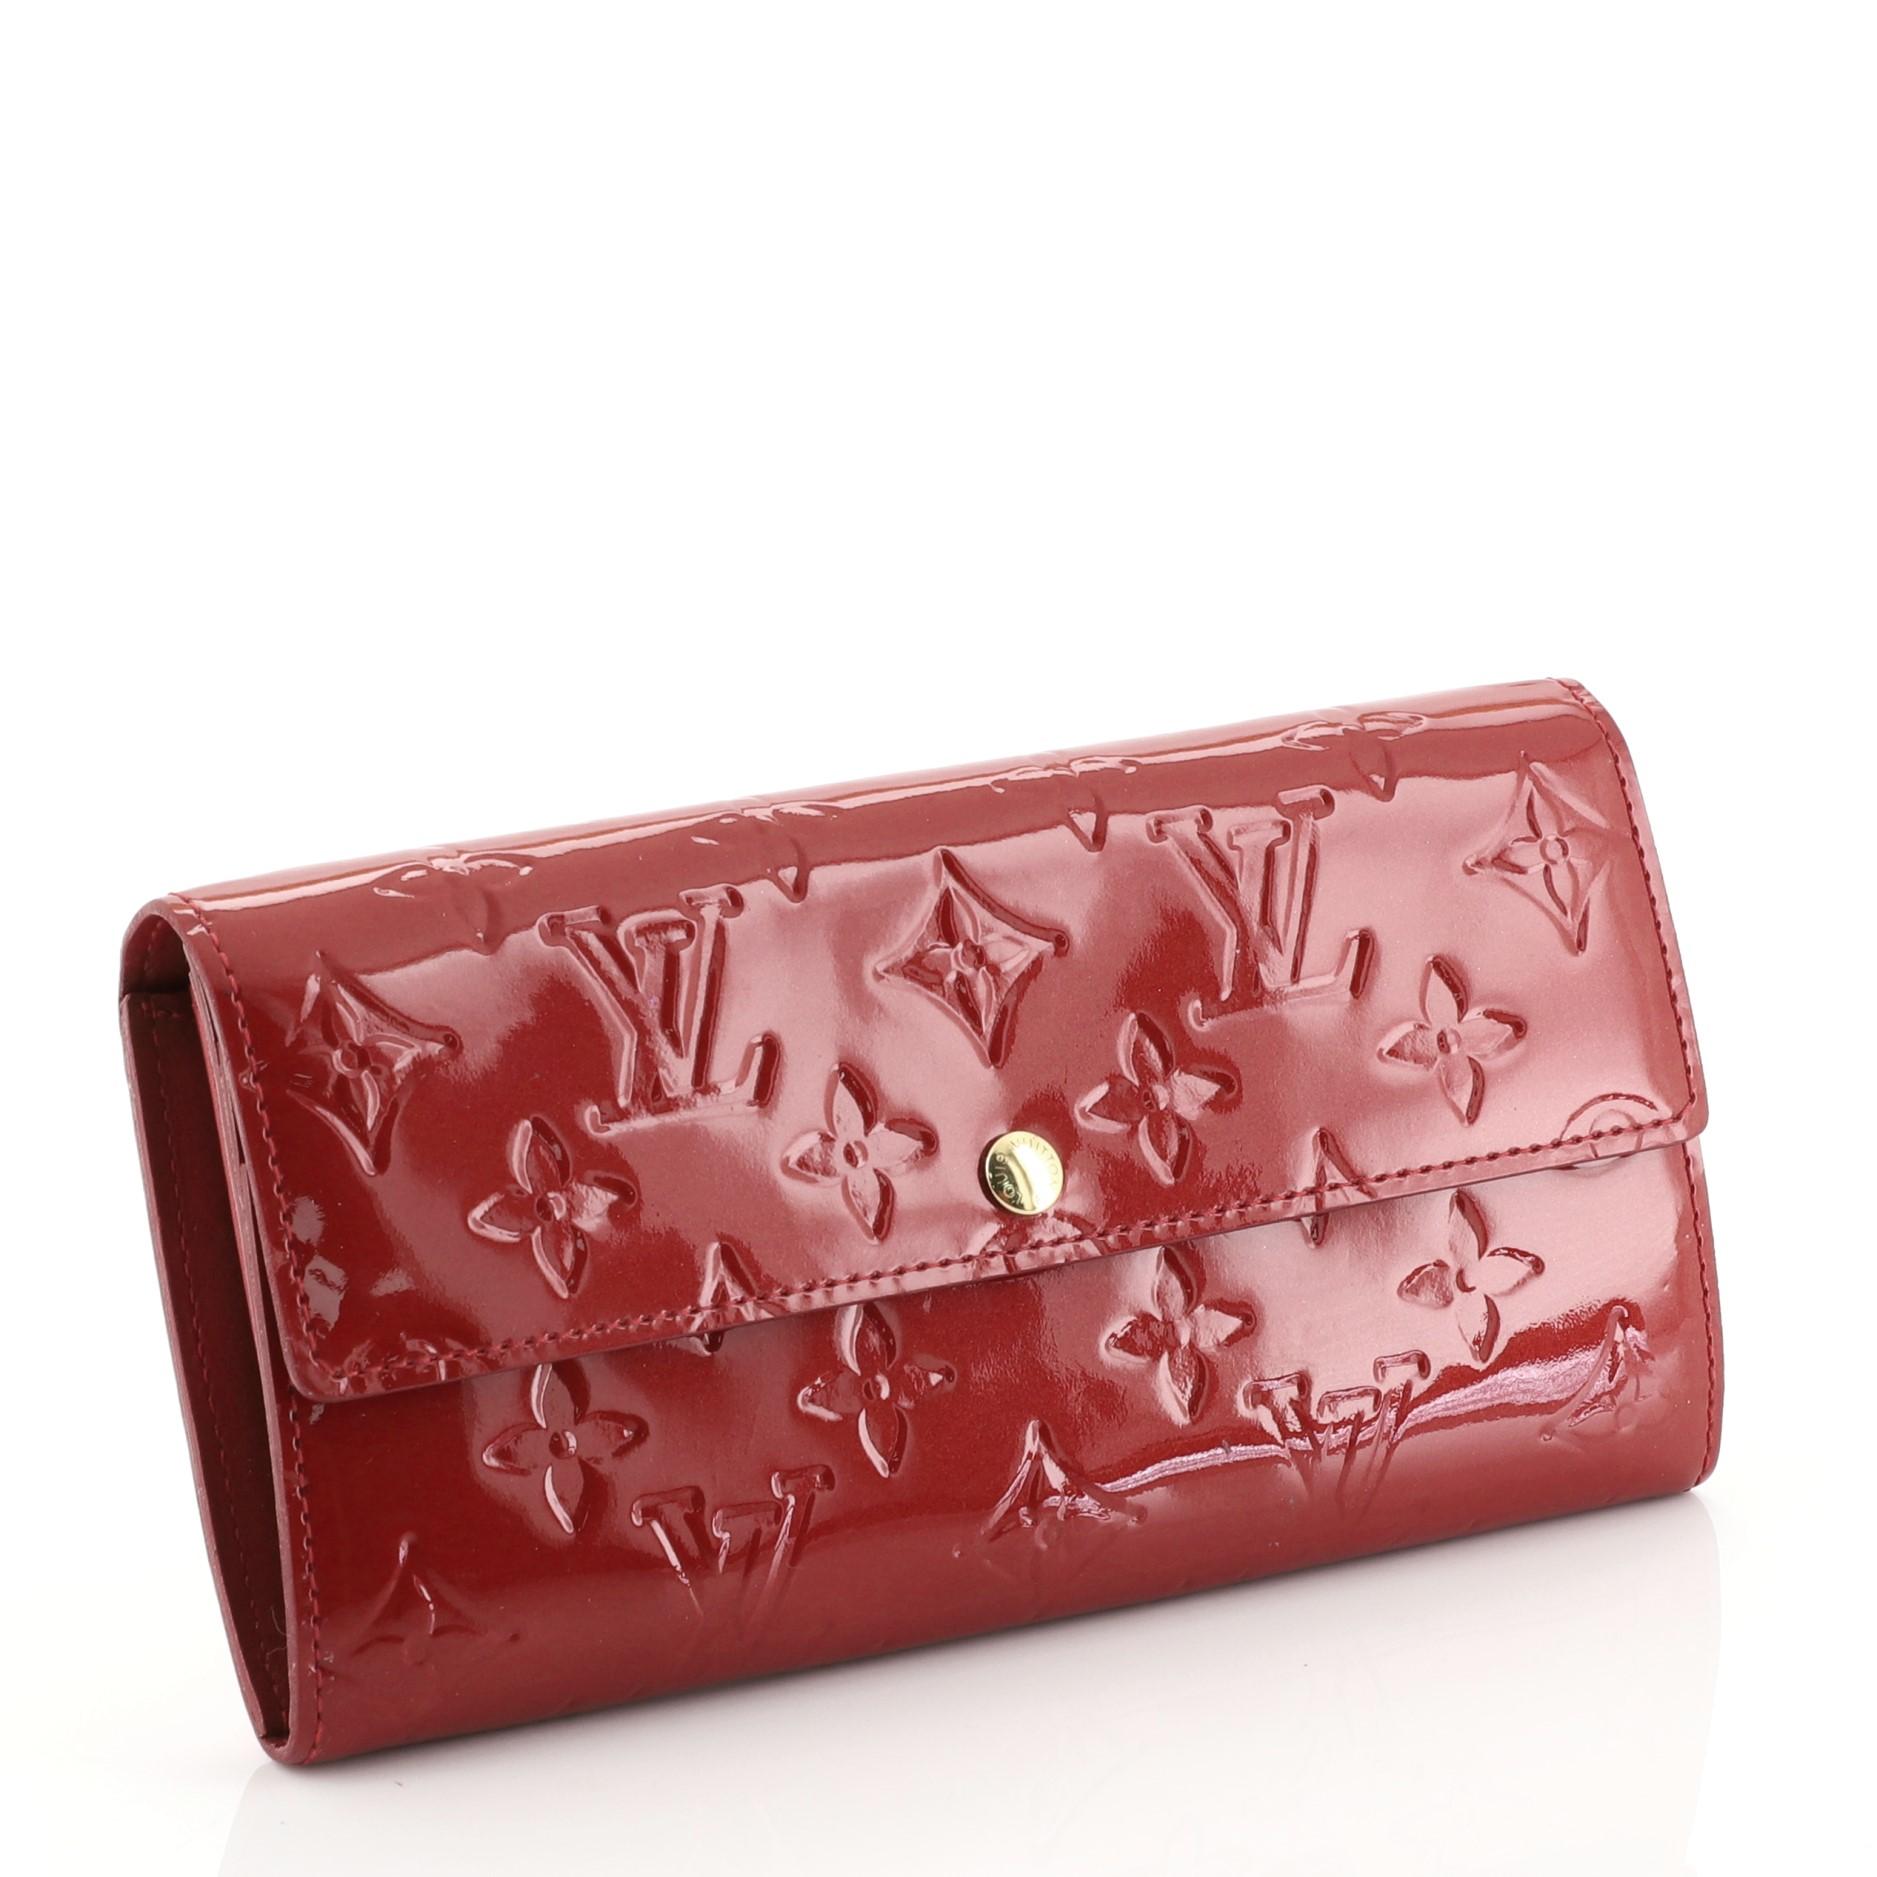 This Louis Vuitton Sarah Wallet Monogram Vernis, crafted in red monogram vernis leather, features gold-tone hardware. Its snap button closure opens to a red leather interior with multiple card slots and a middle zip compartment. Authenticity code